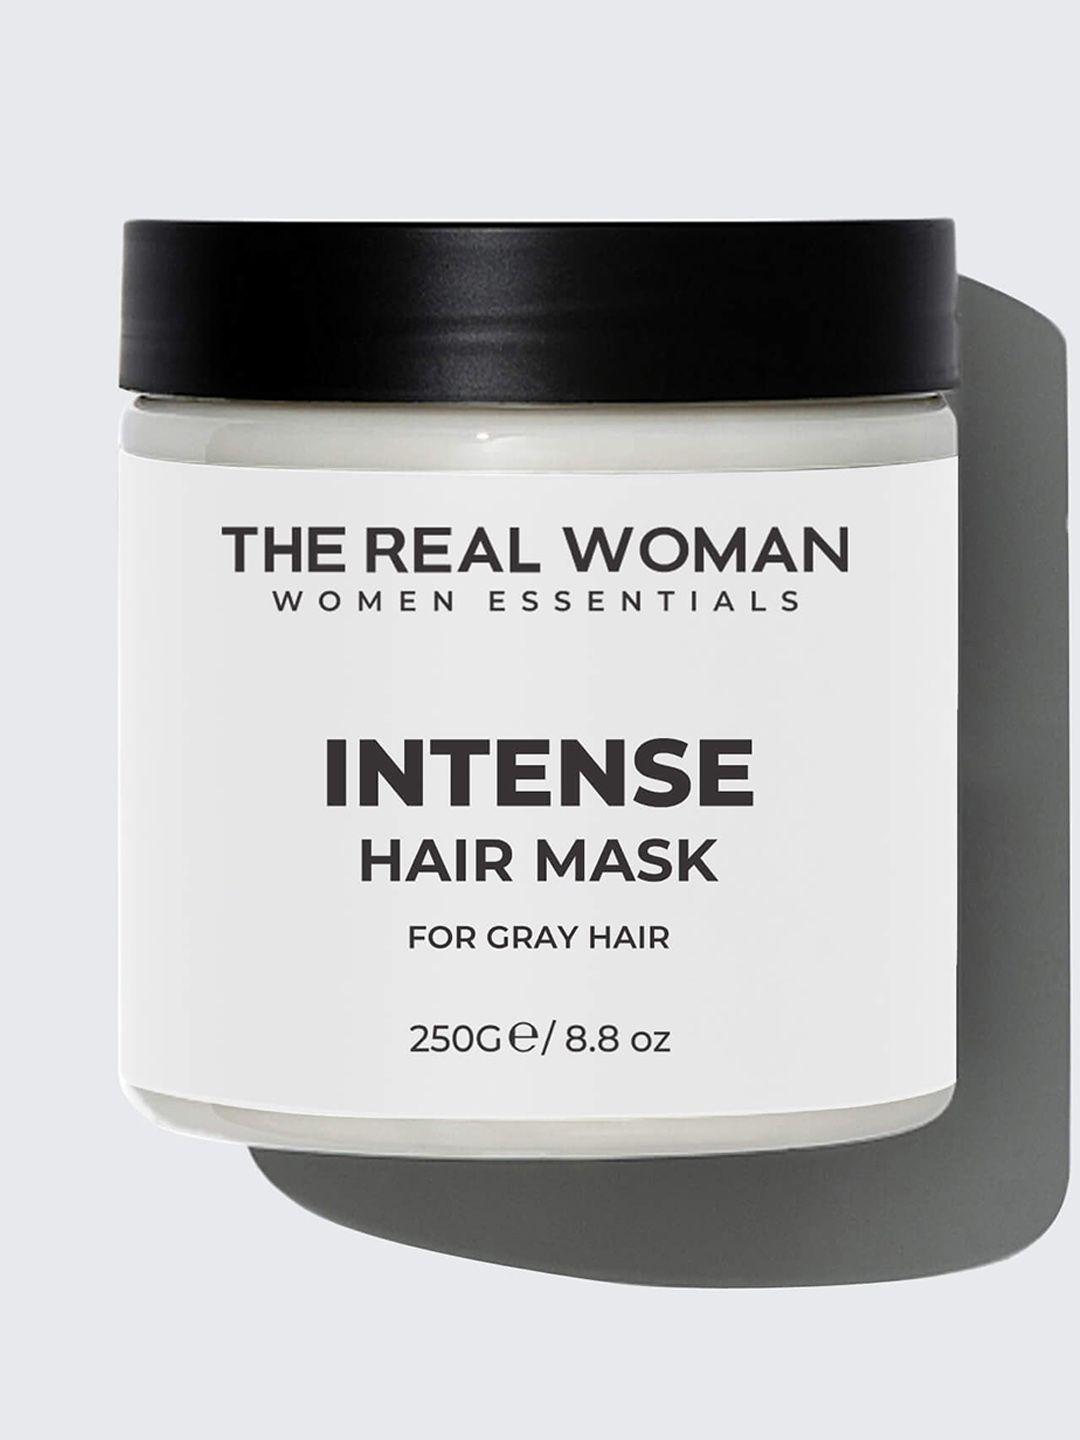 the real woman intense hair mask for gray hair - 200 gm